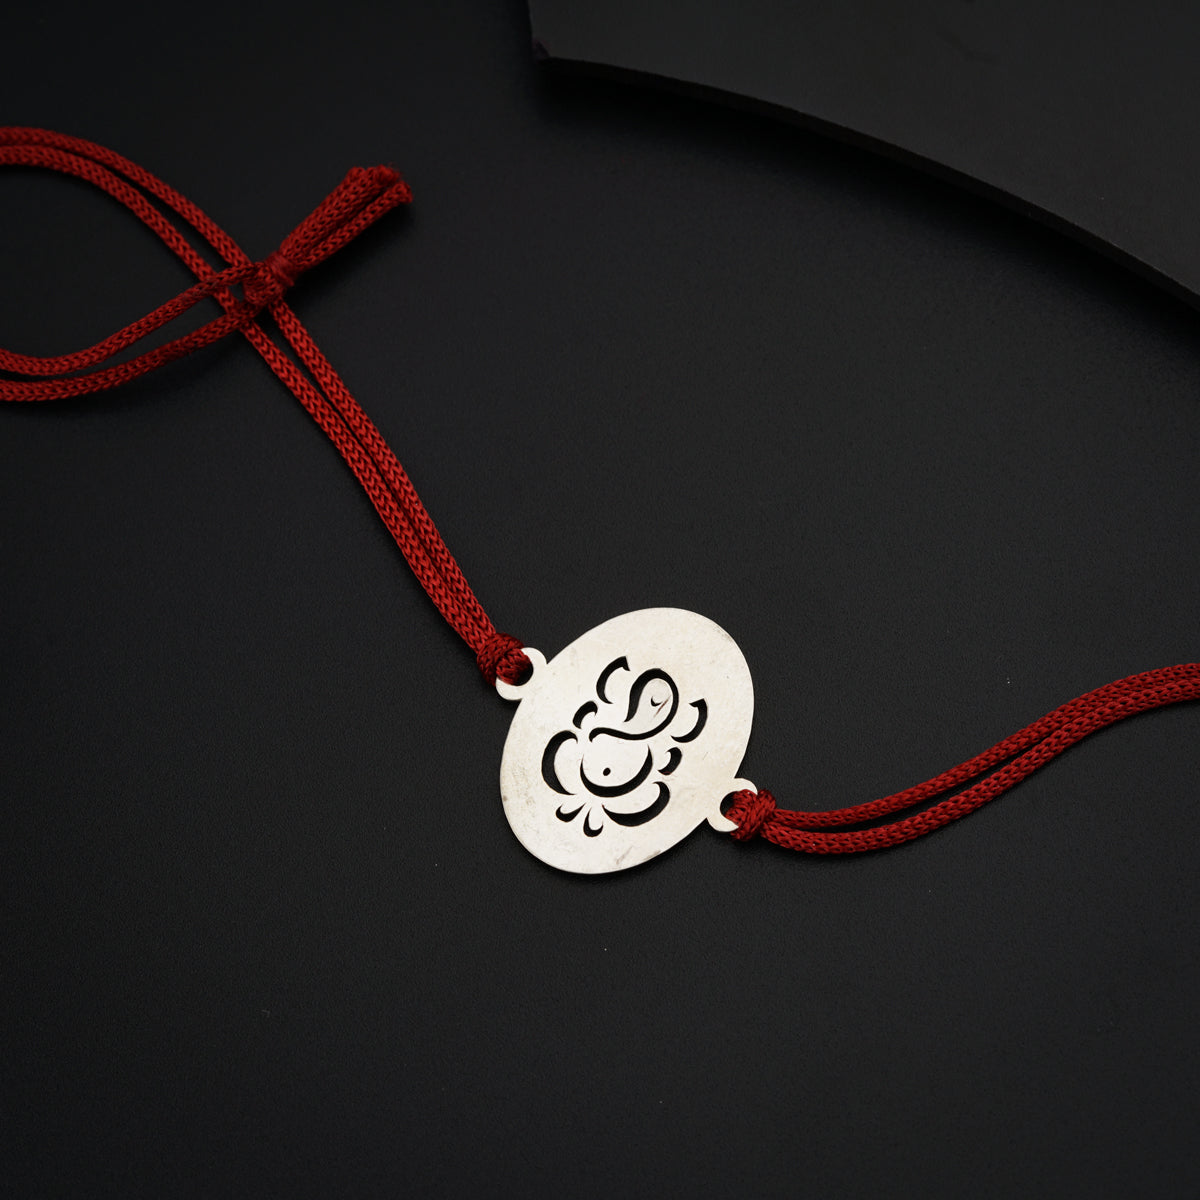 a red string with a silver pendant on it